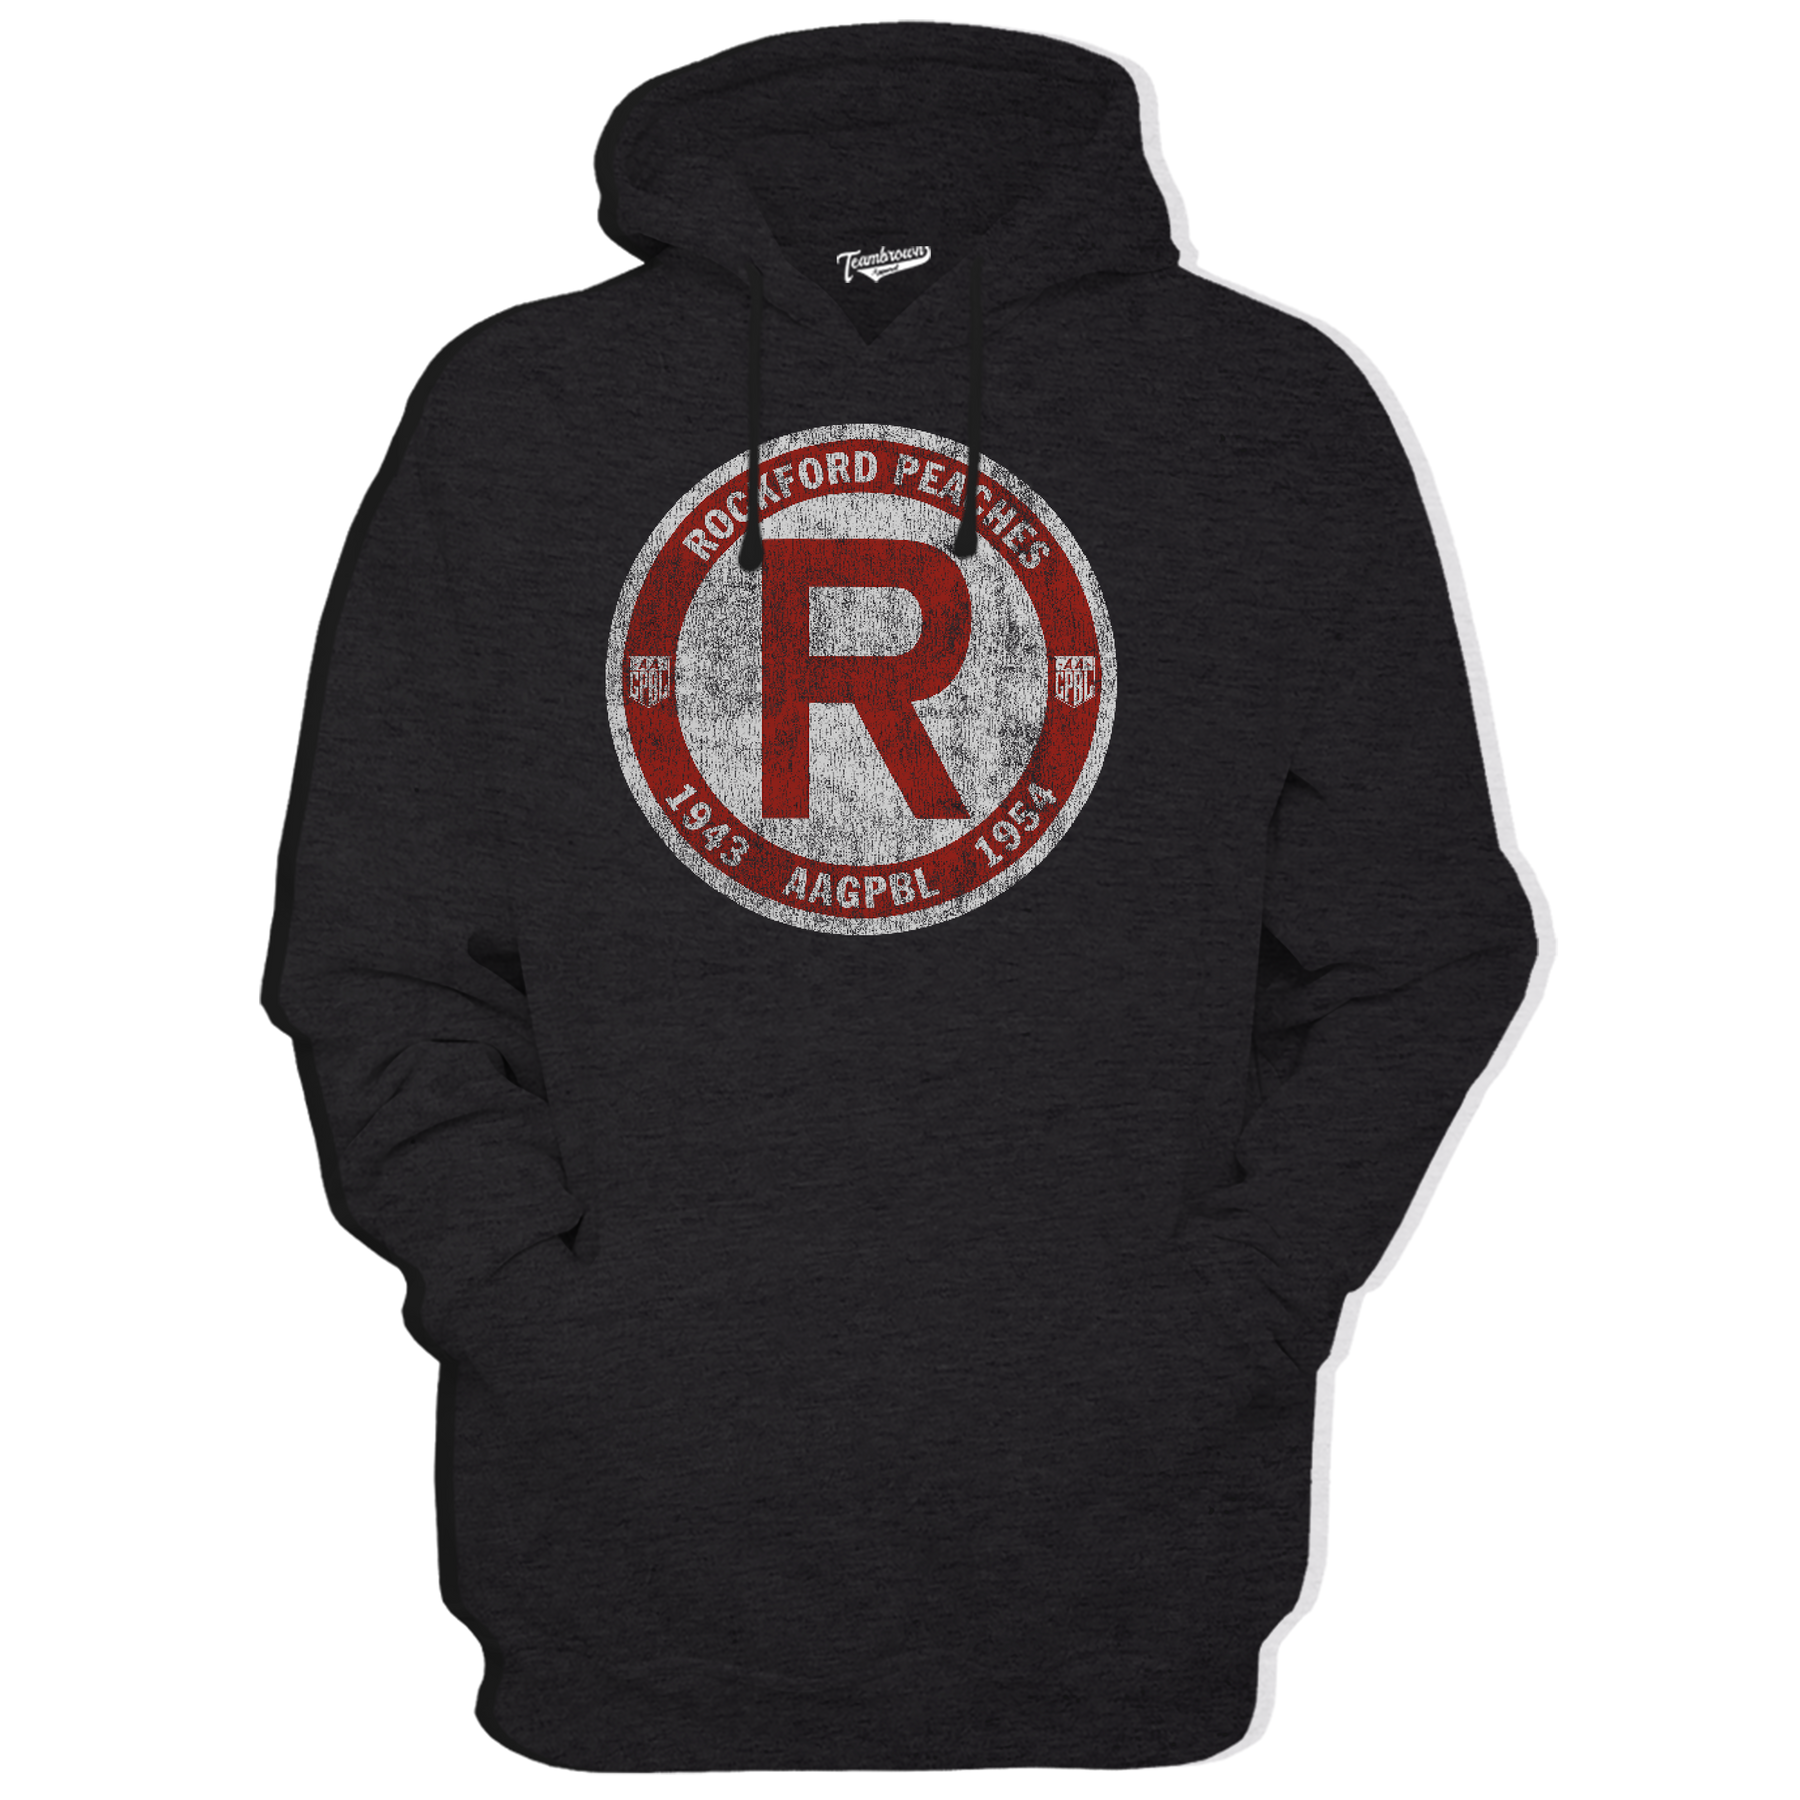 Rockford Peaches '43-'54 - Unisex Premium Hoodie | Officially Licensed - AAGPBL